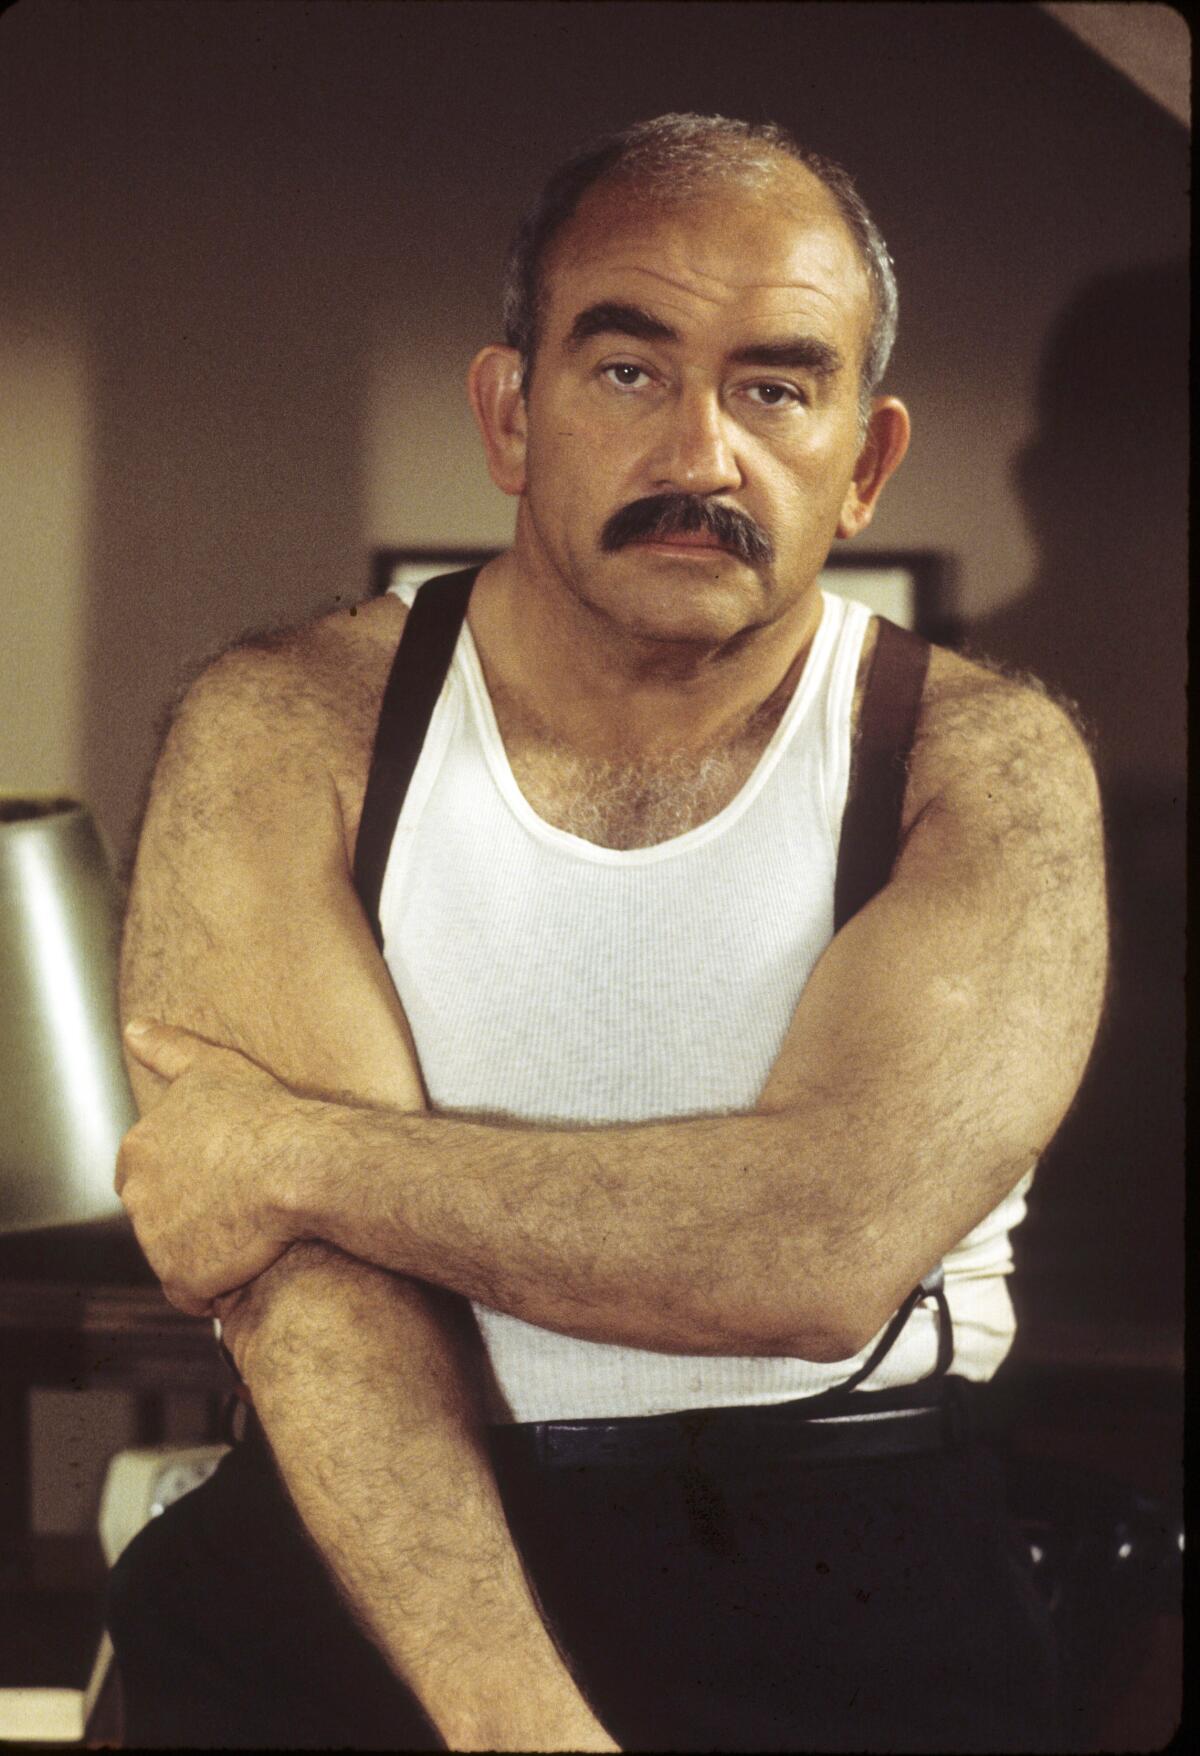 A man with a mustache wearing a white tank top and suspenders